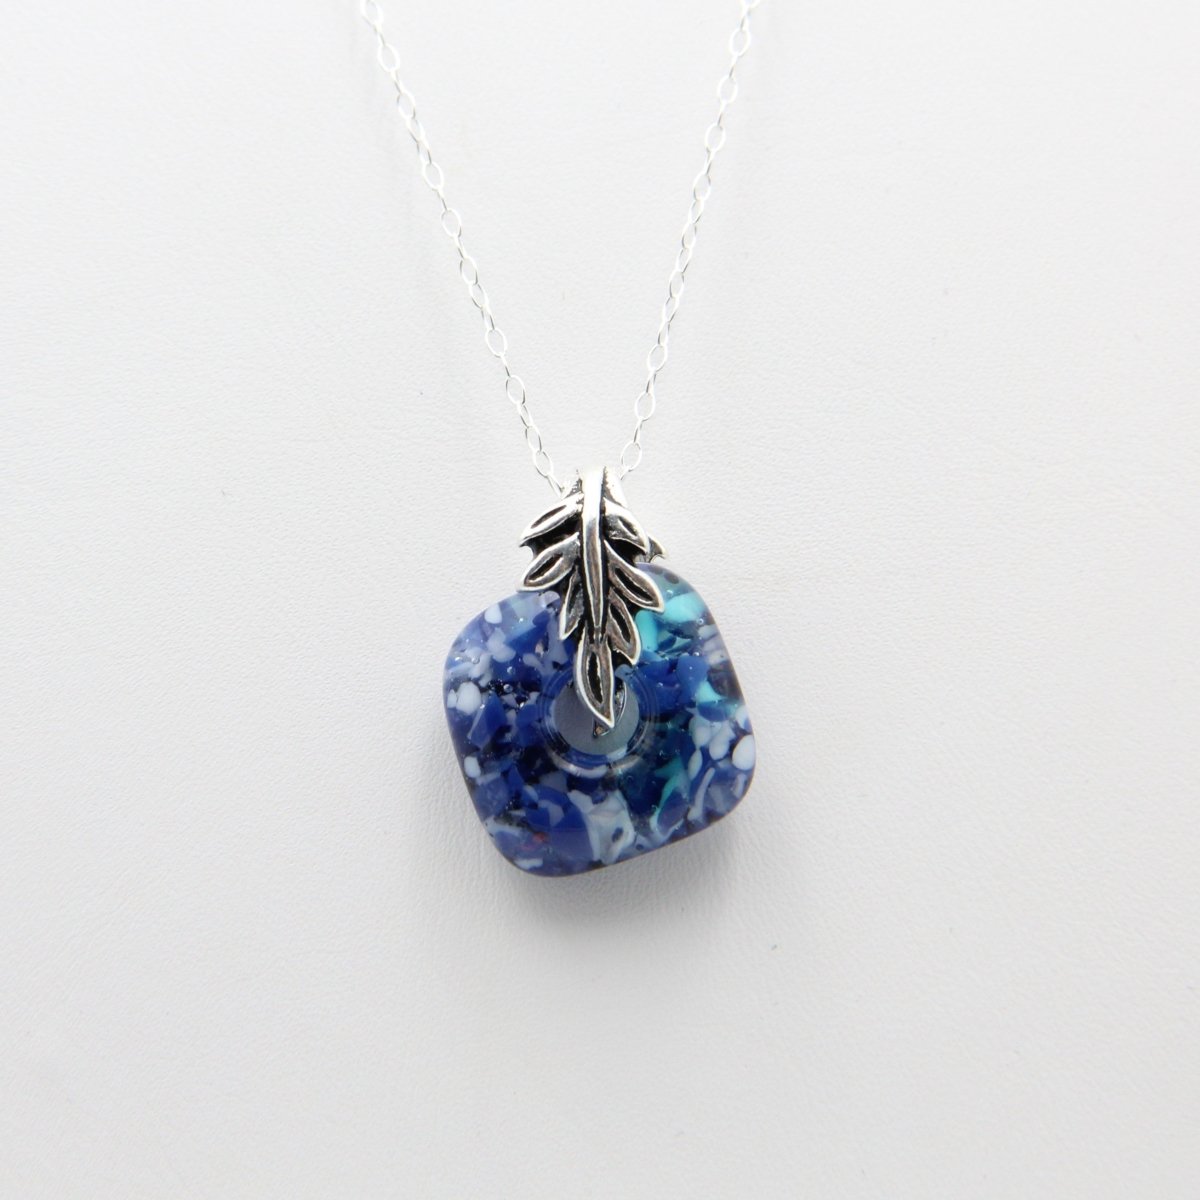 Delicate Speckled Blue and White Glass Pendant